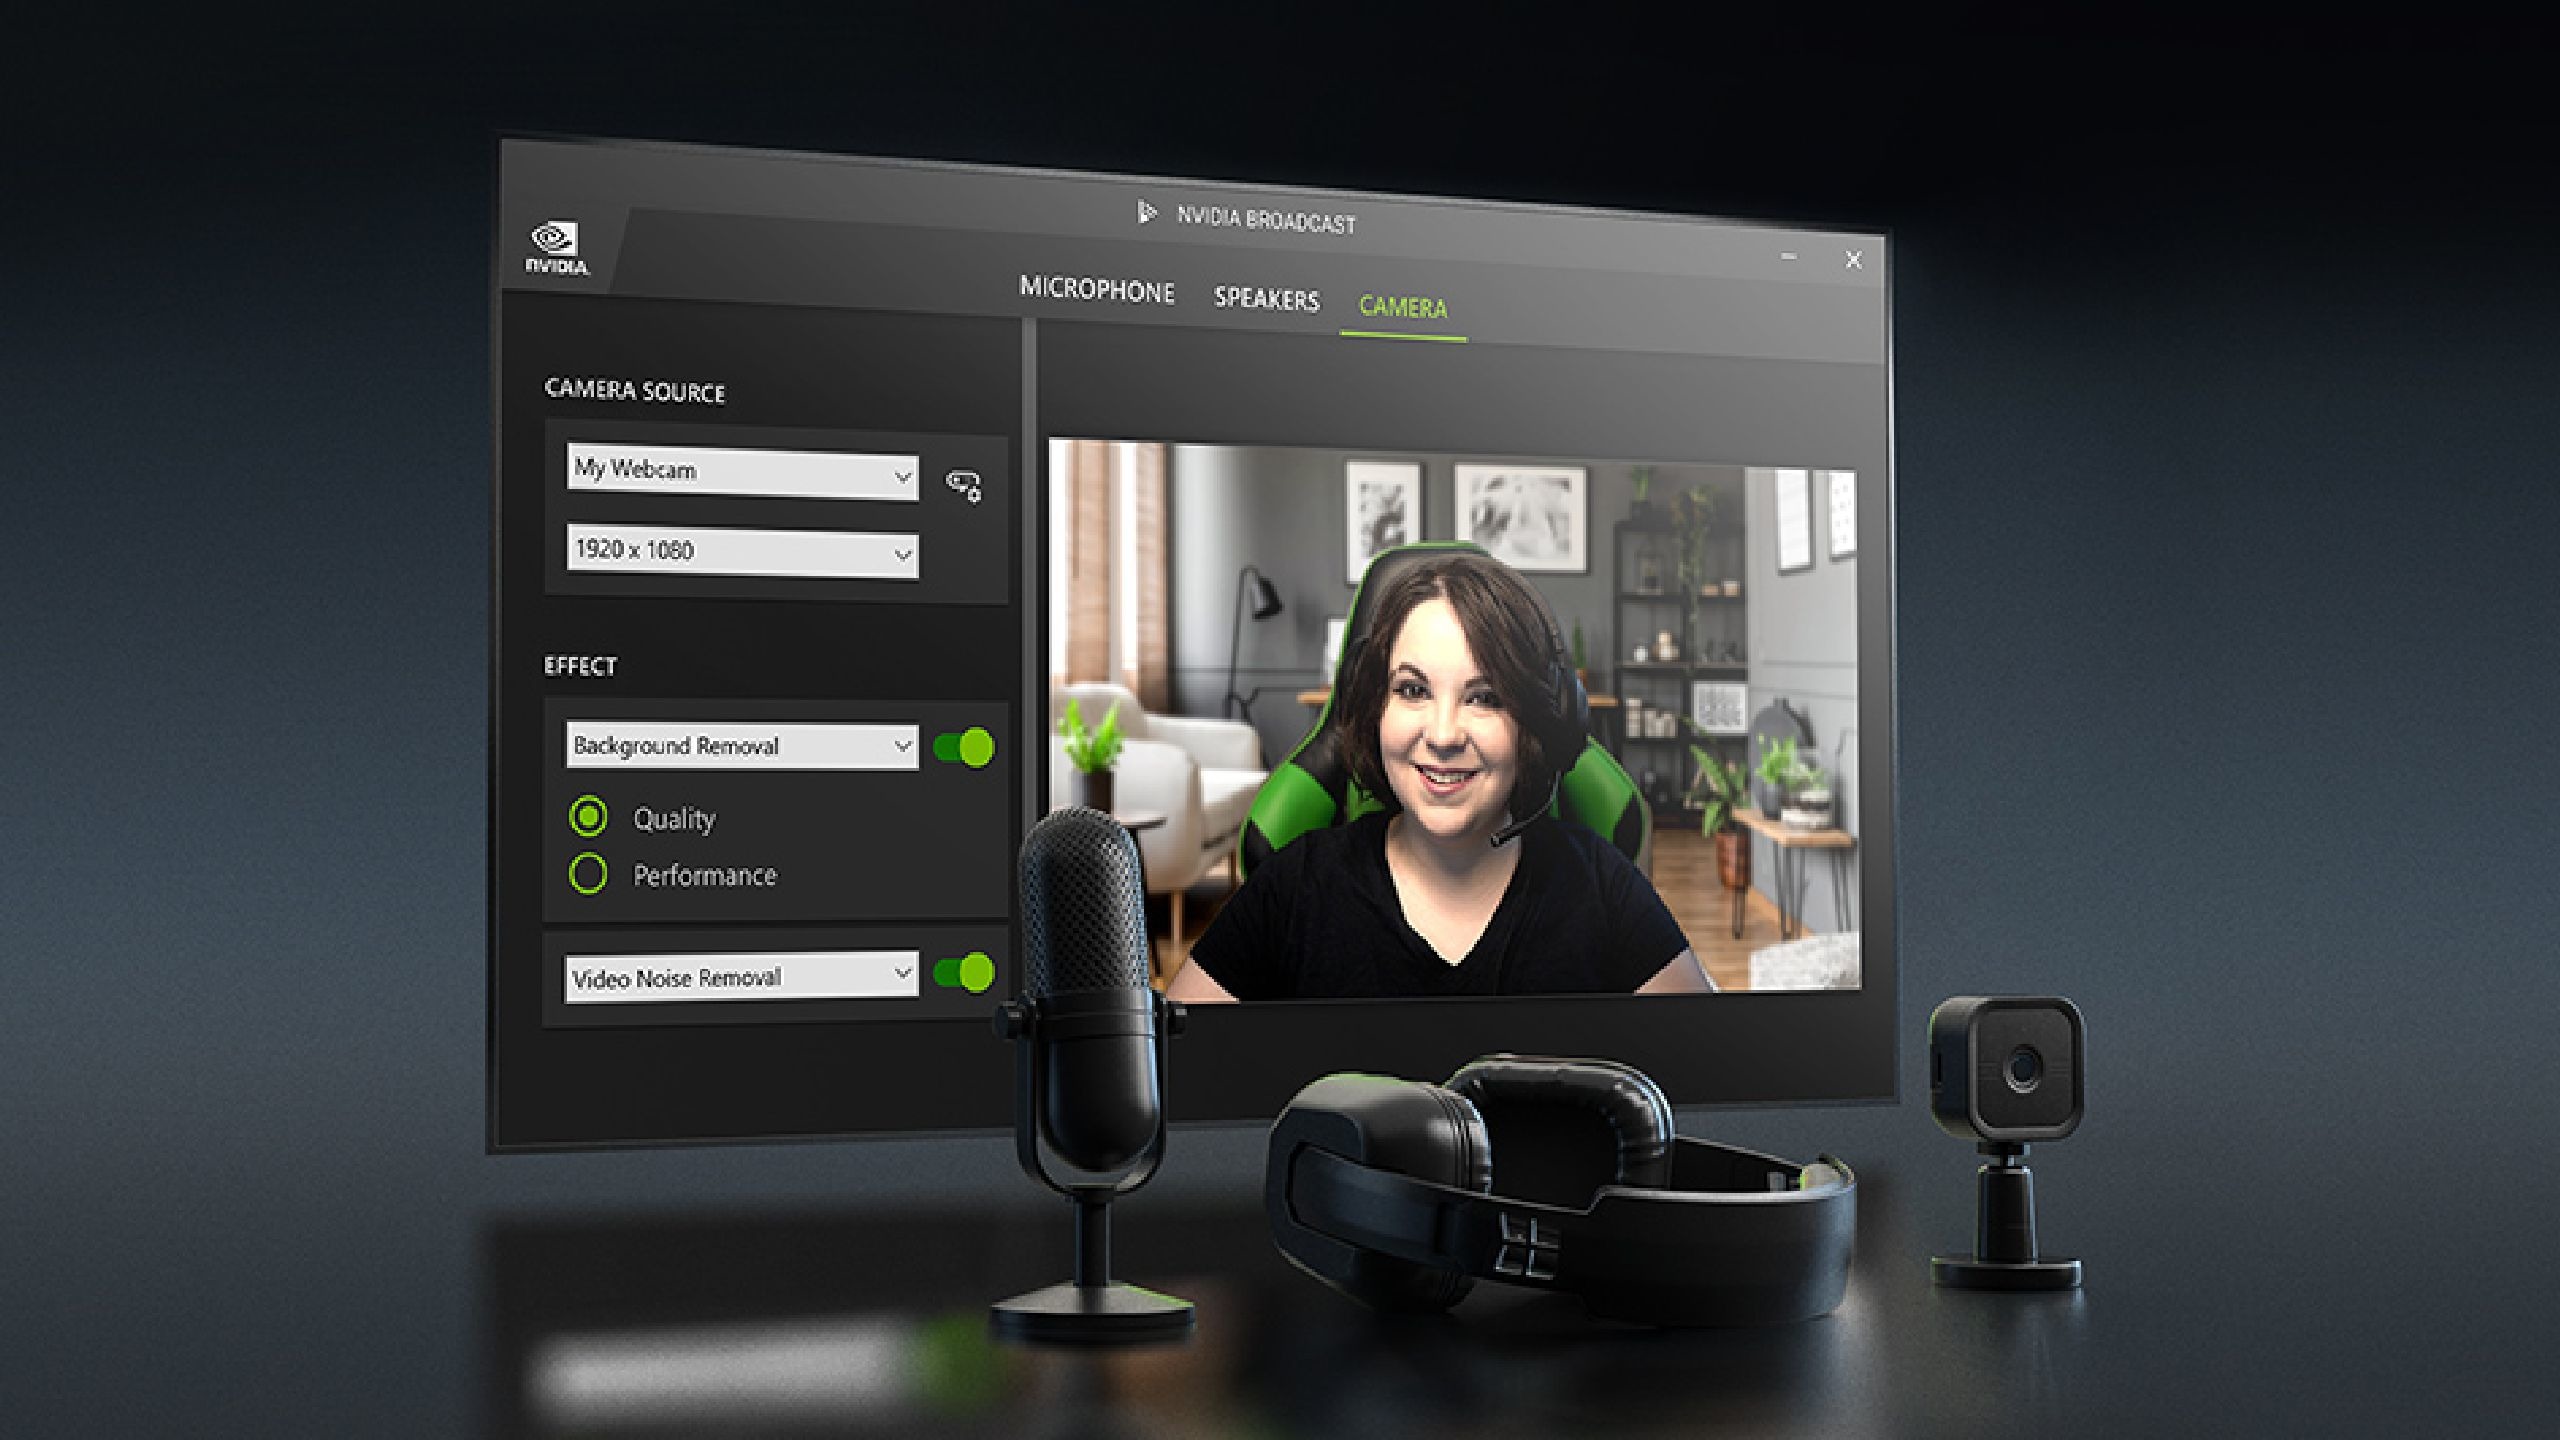 Learn more about NVIDIA Broadcast App